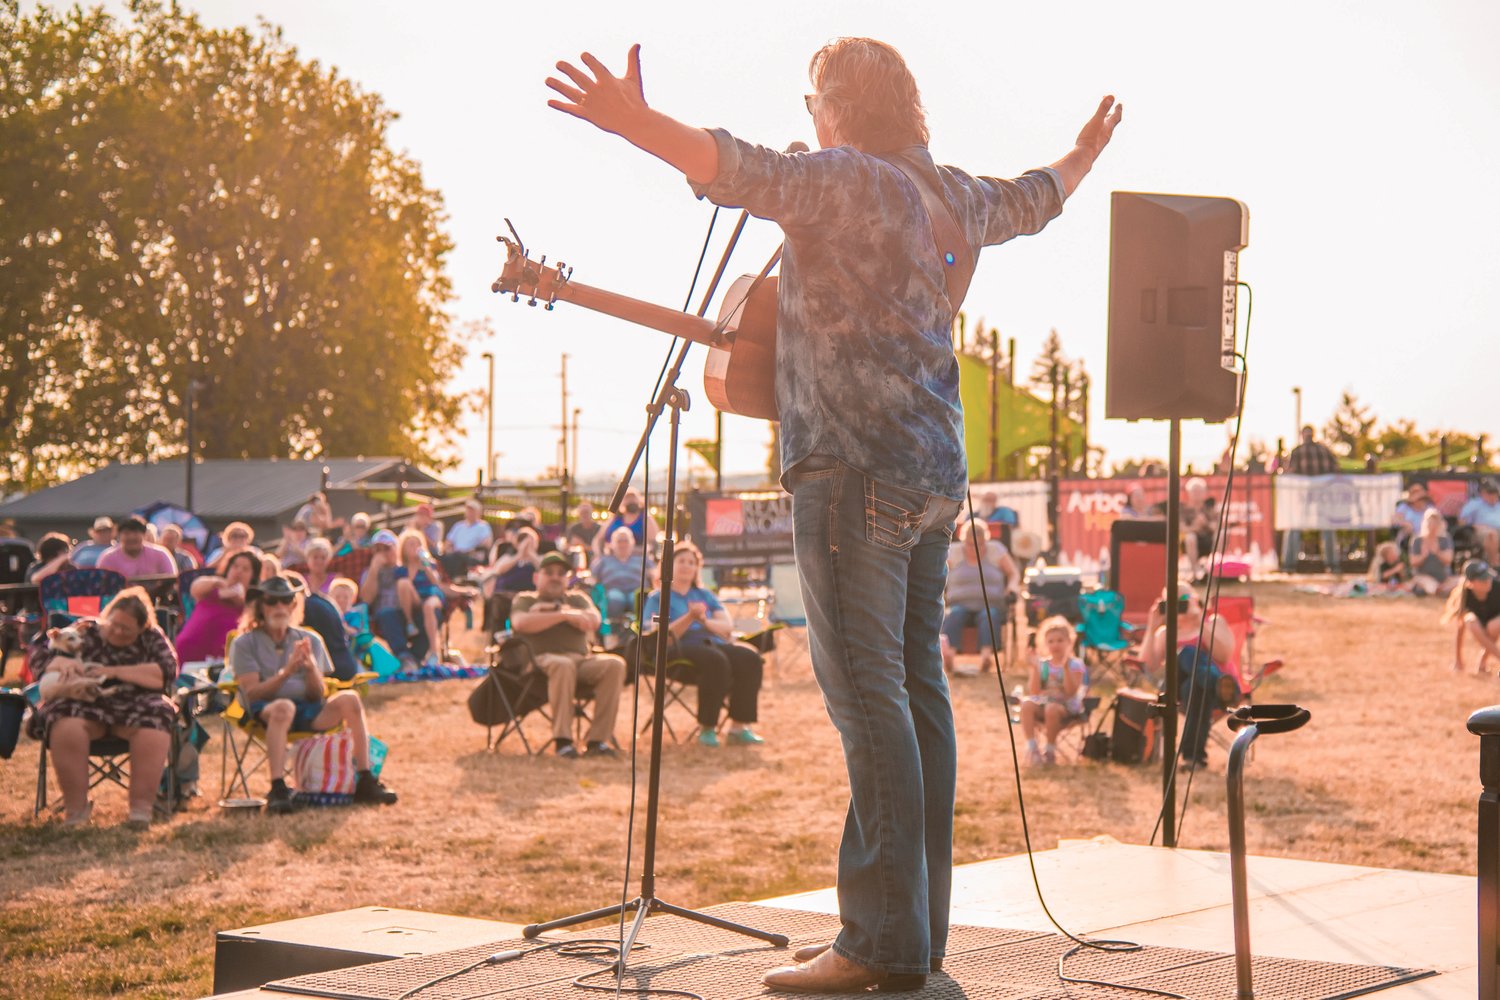 Billy Dean raises his arms after finishing a song during a Music at the Park performance in Chehalis on Friday at Recreation Park.